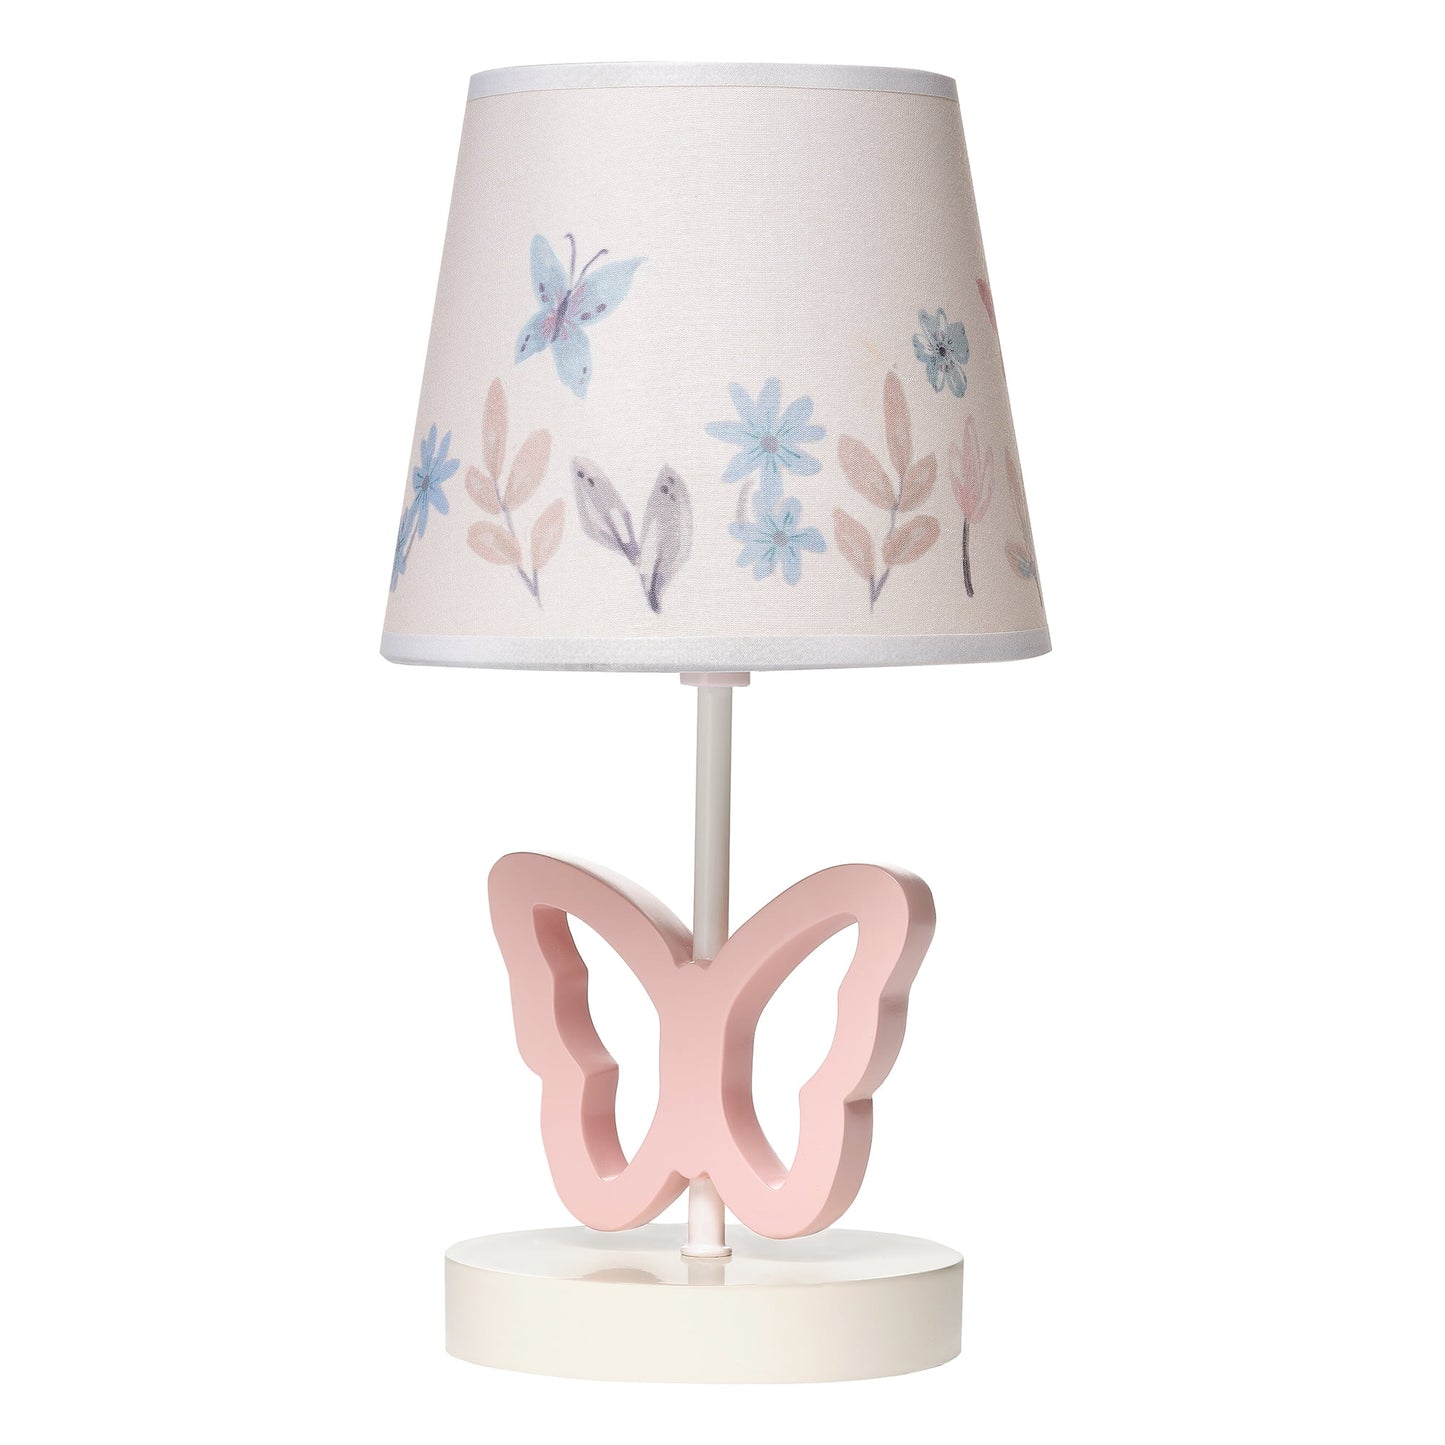 Lambs & Ivy Enchanted Garden Butterfly Lamp with Floral Shade